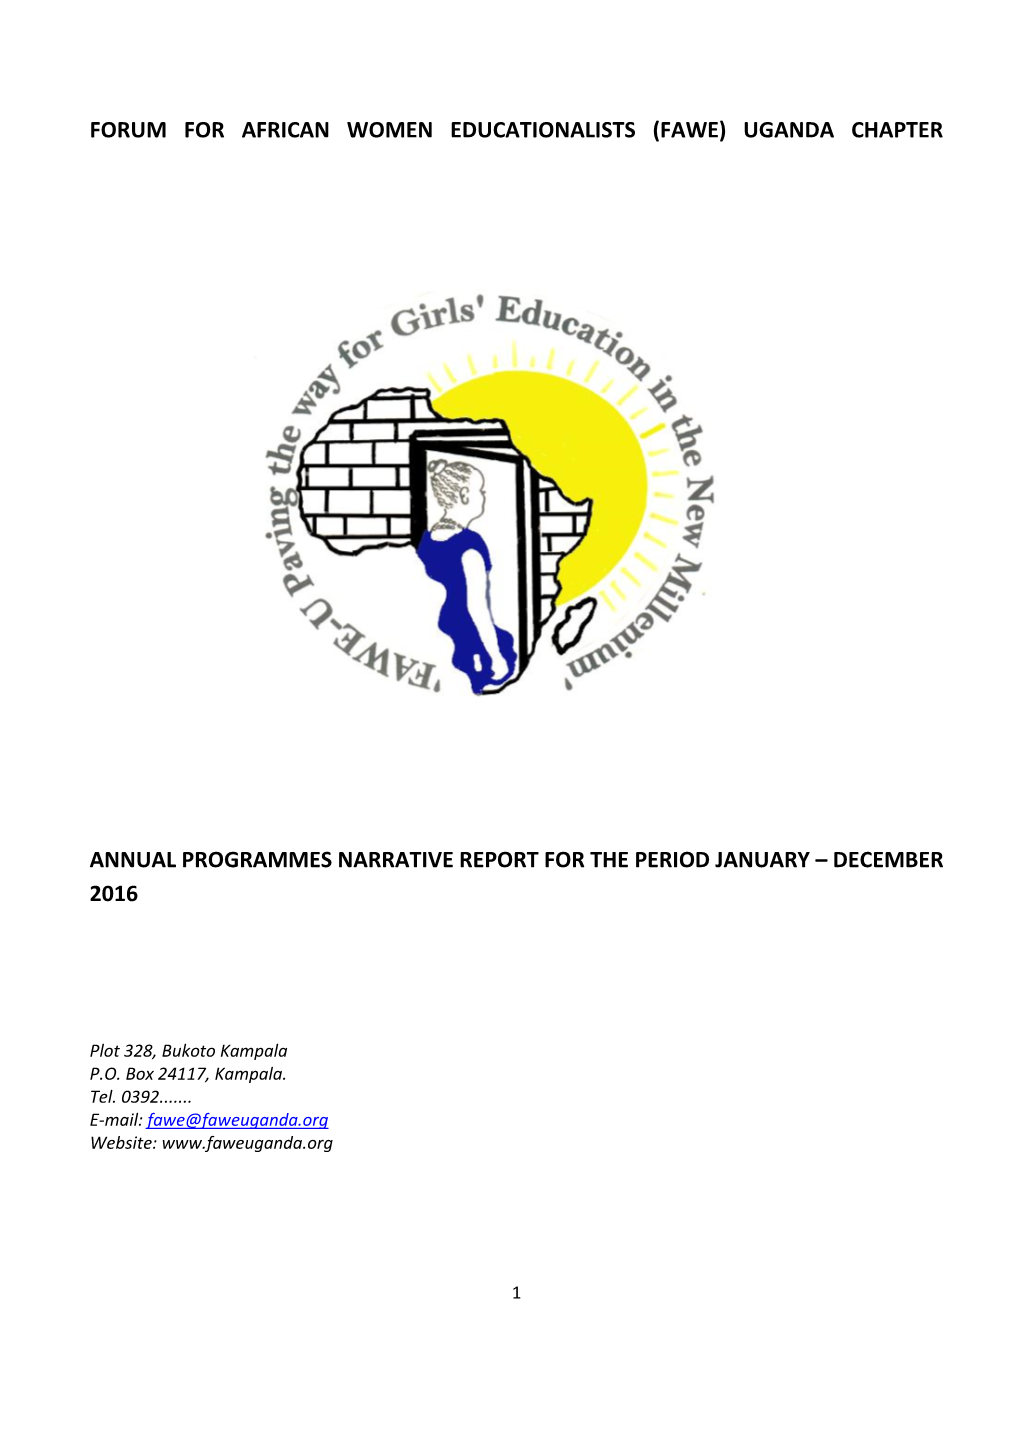 Uganda Chapter Annual Programmes Narrative Report for the Period January